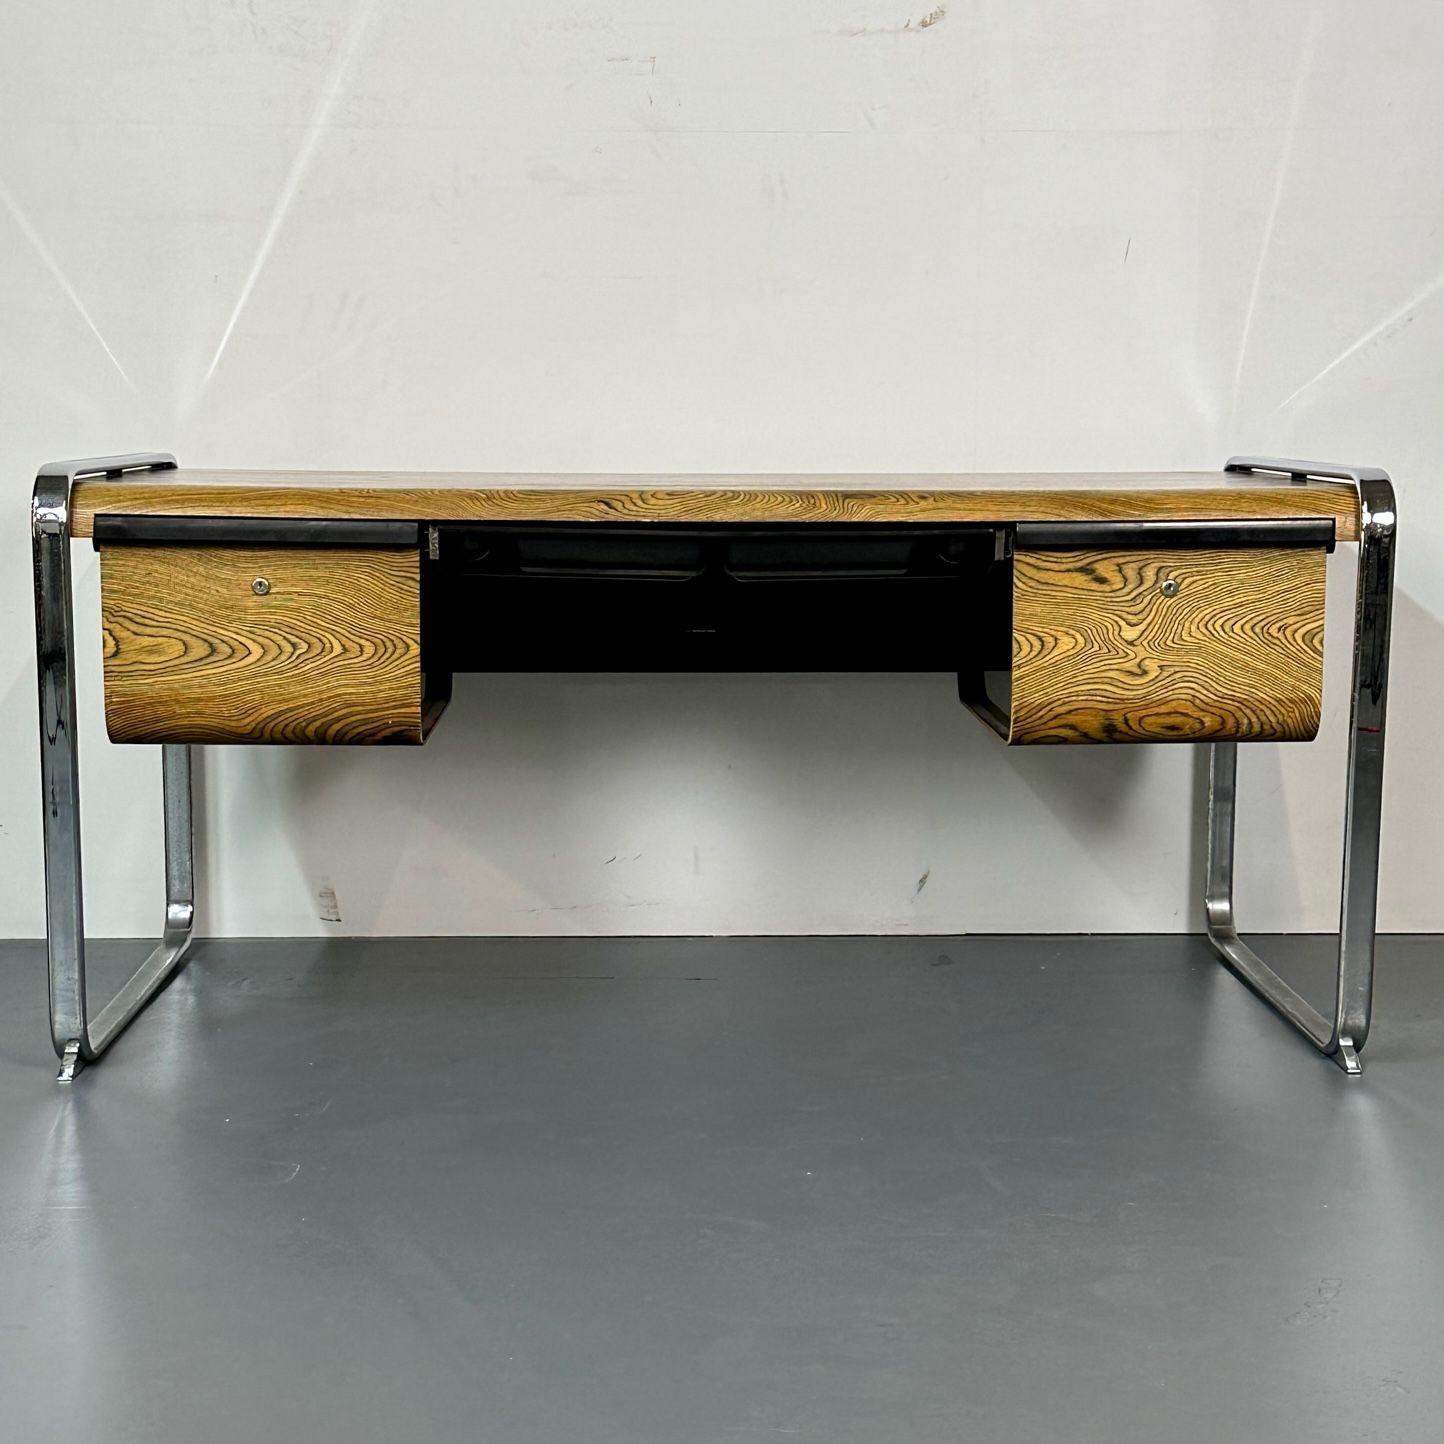 Rare Mid Century Modern Peter Protzman for Herman Miller Zebrawood / Chrome Desk
 
This iconic desk, designed by Peter Protzman for Herman Miller, was only manufactured for two years (1970-1971) making it a rare, limited production item. The smooth,